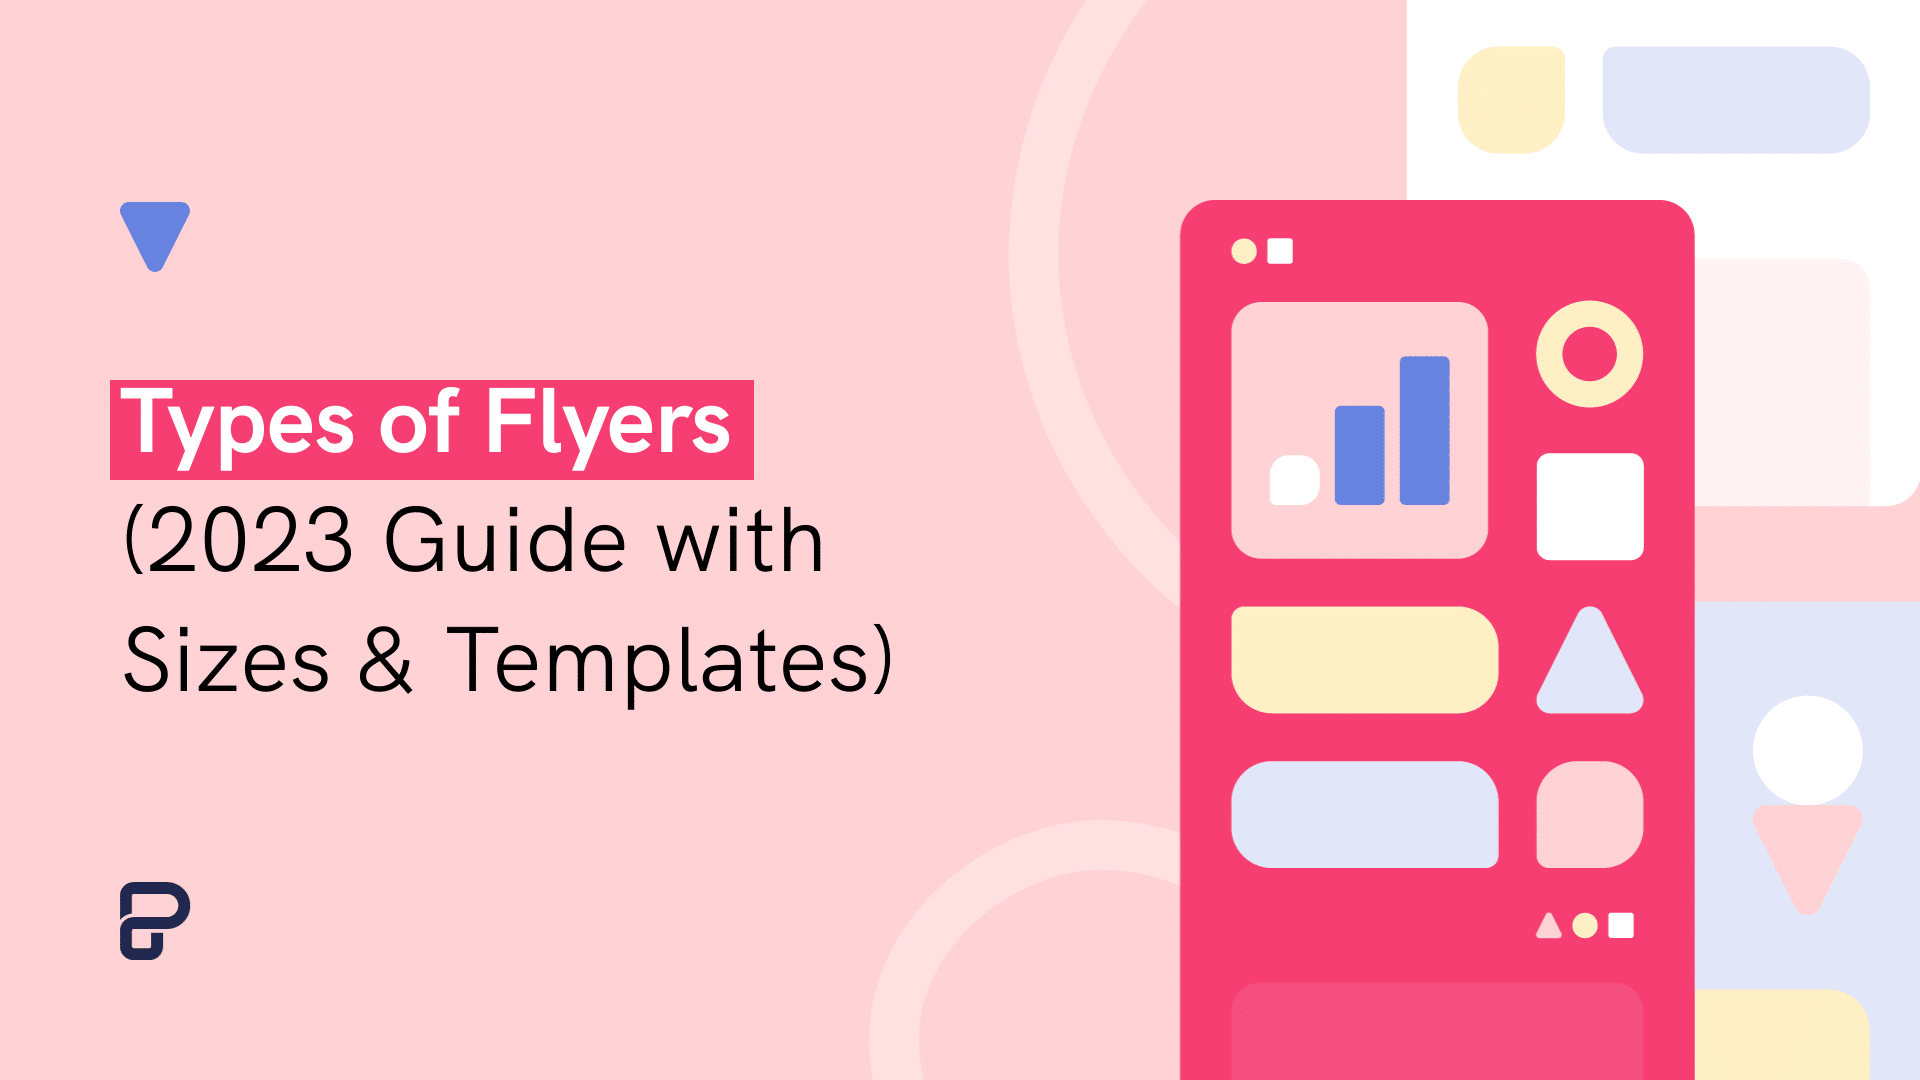 Learn about types of flyers, flyer sizes, and stunning flyer templates